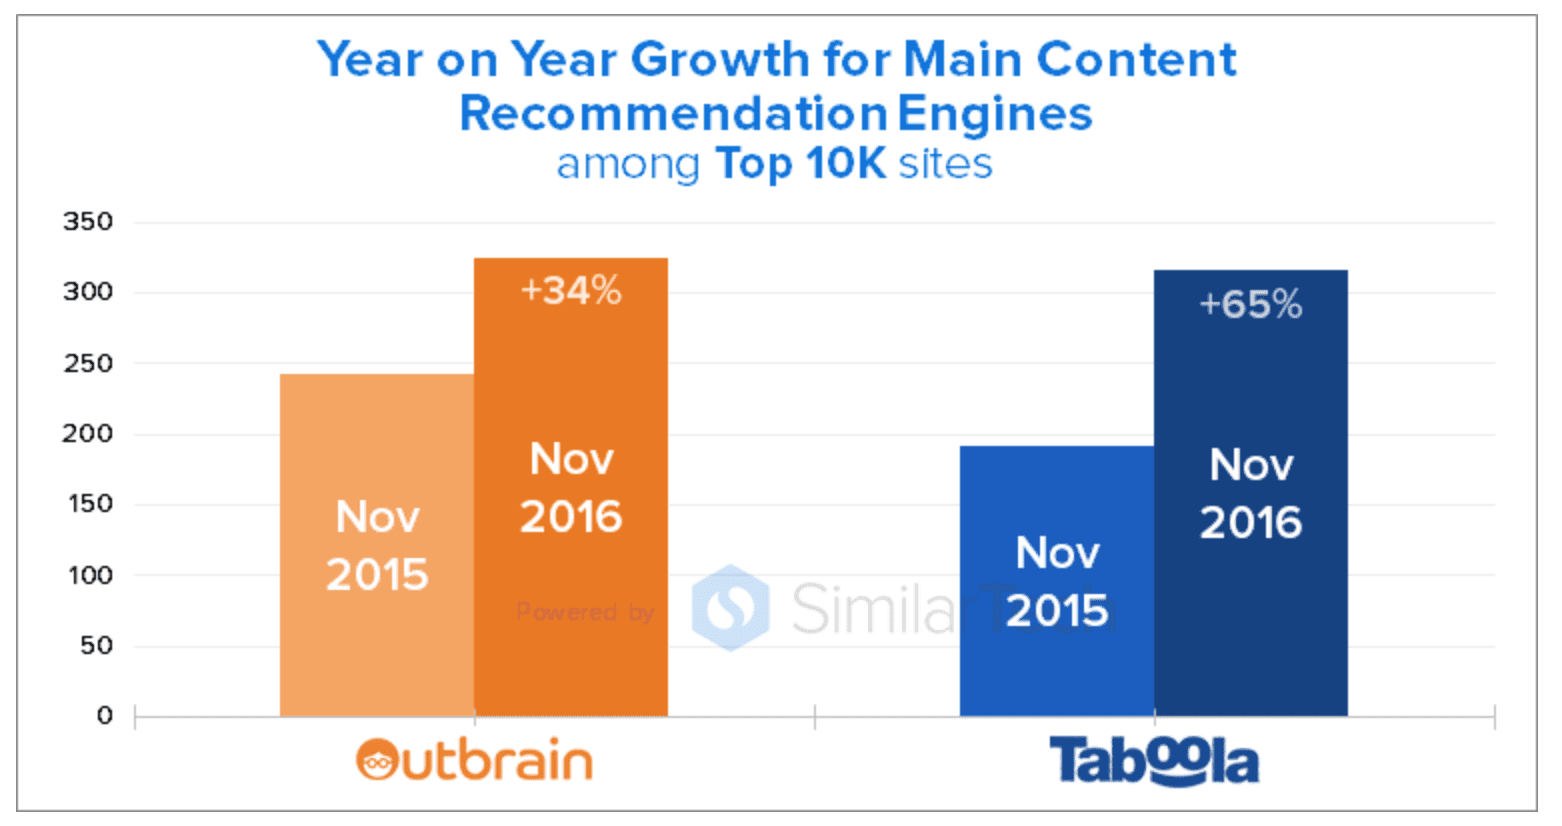 Year on Year Growth for Main Content Recommendation Engines